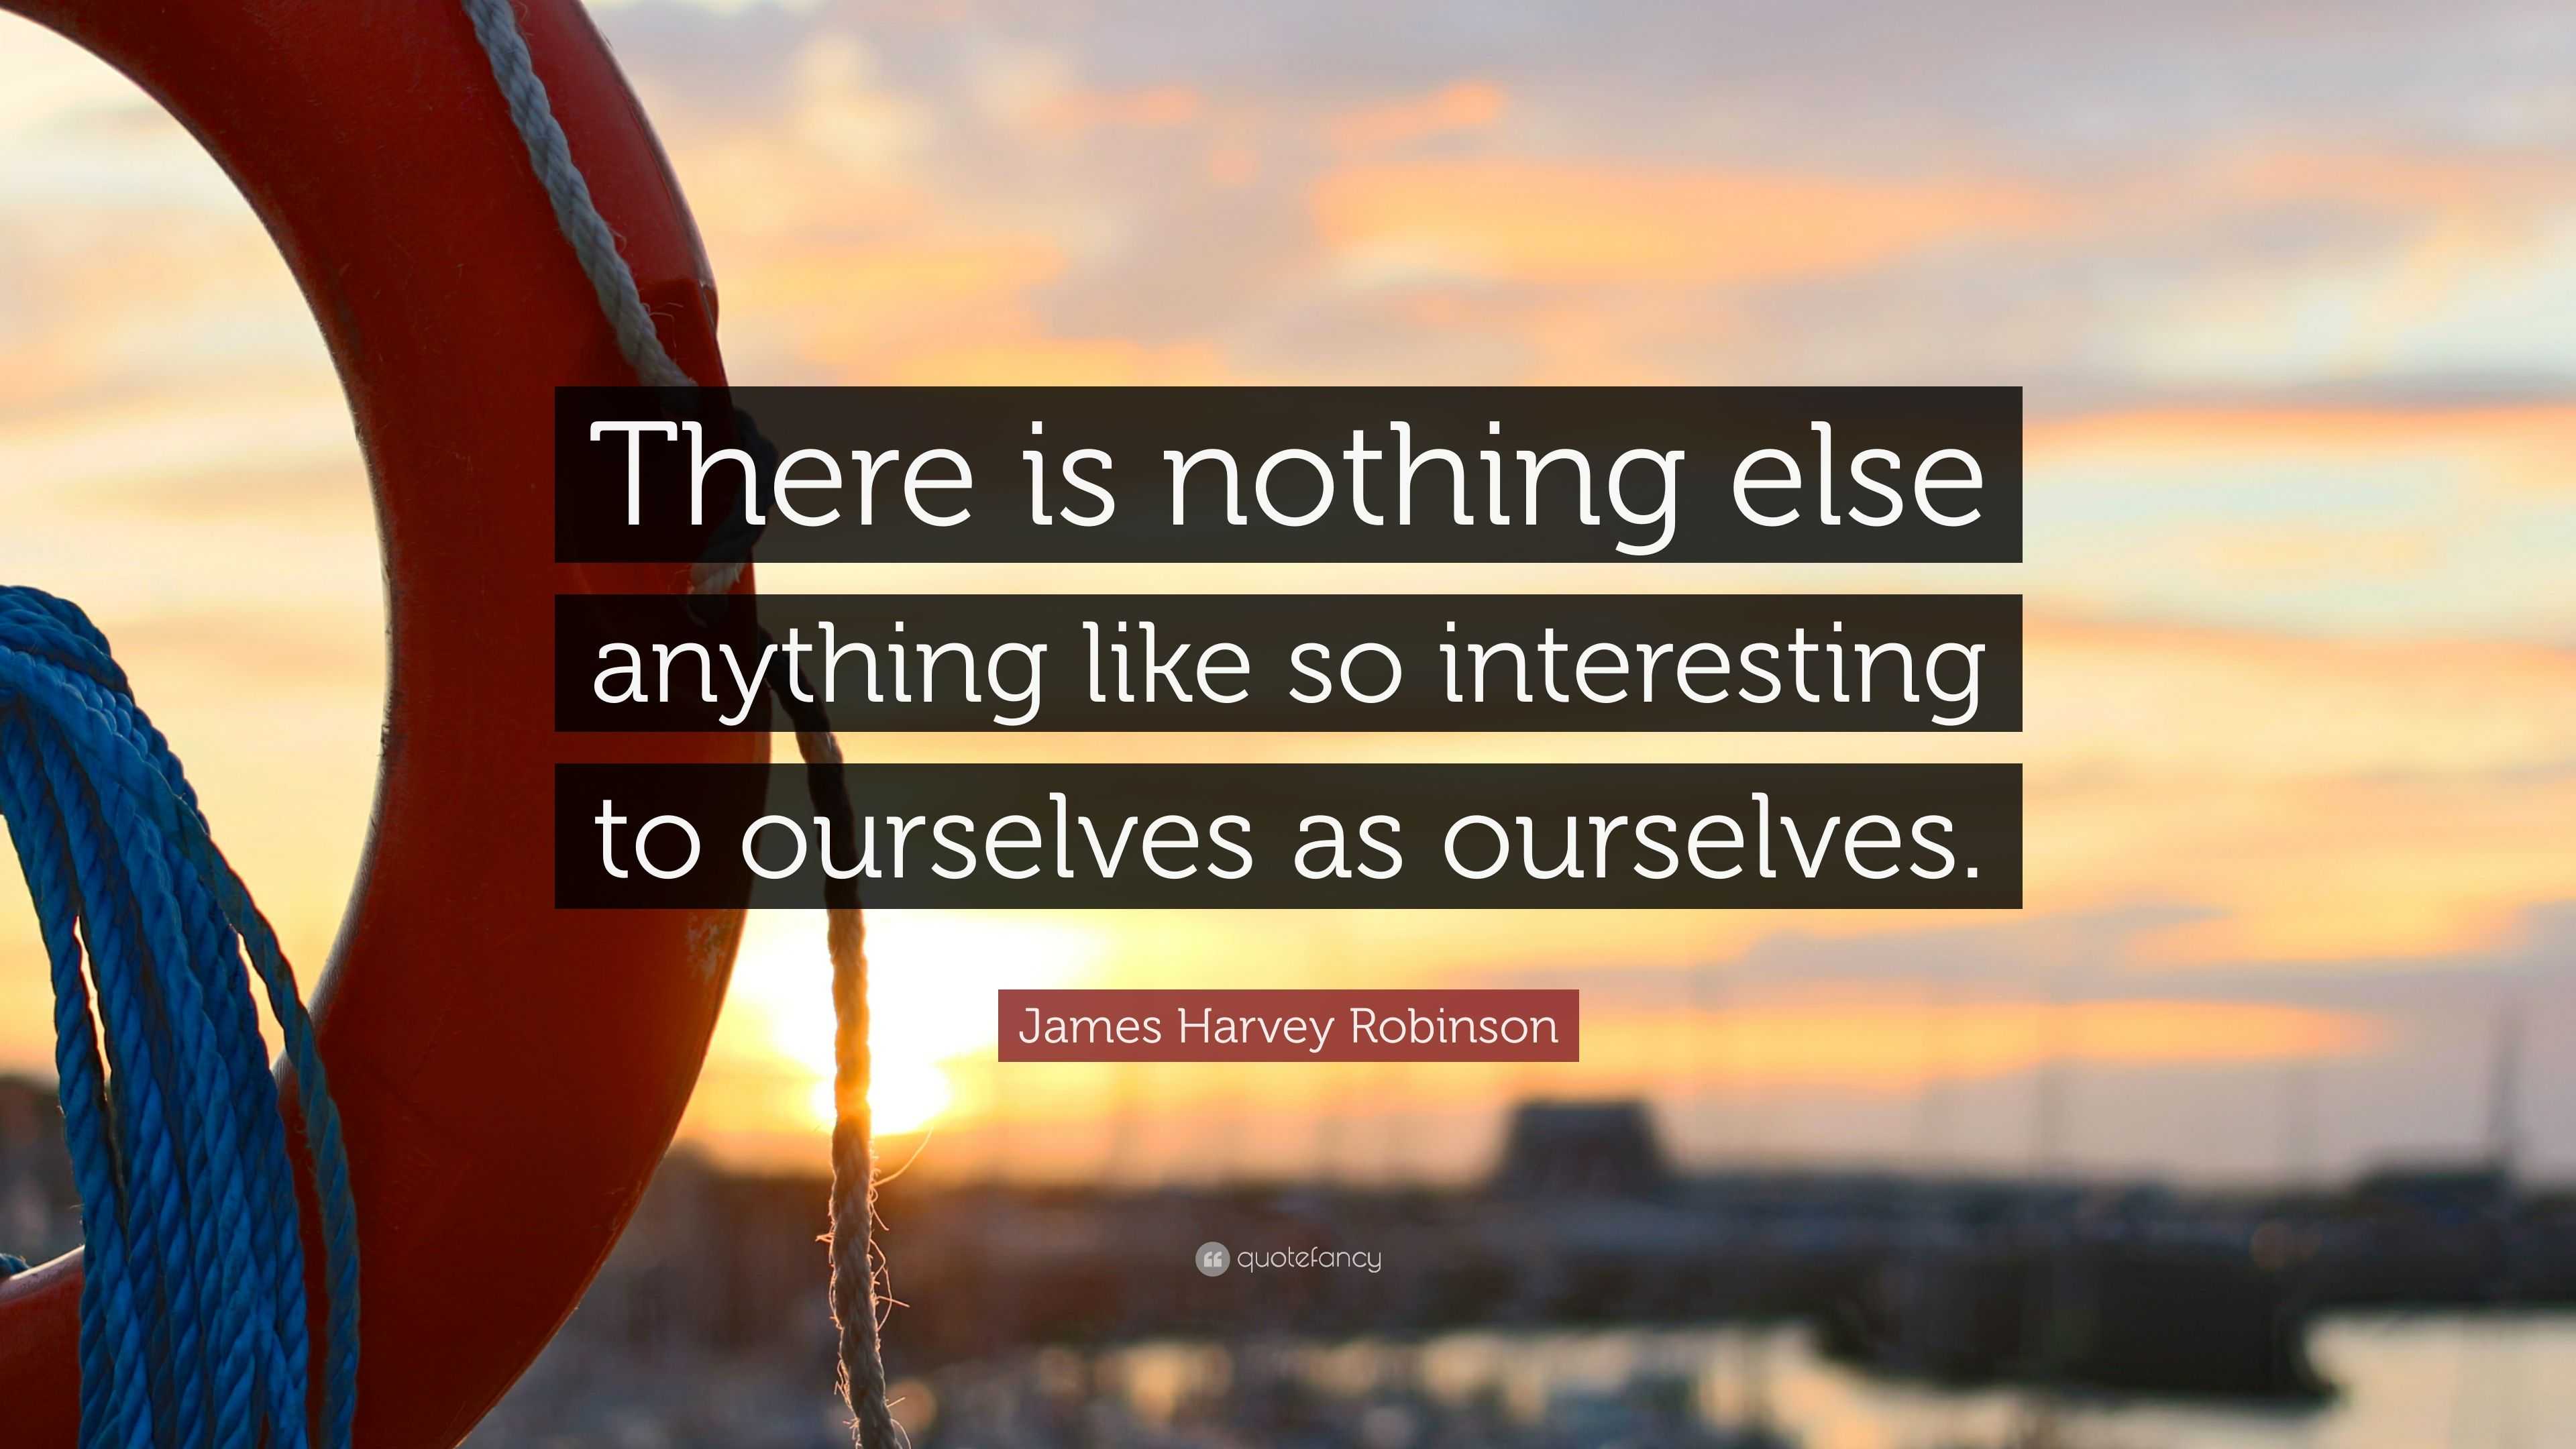 James Harvey Robinson Quote: “There is nothing else anything like so ...